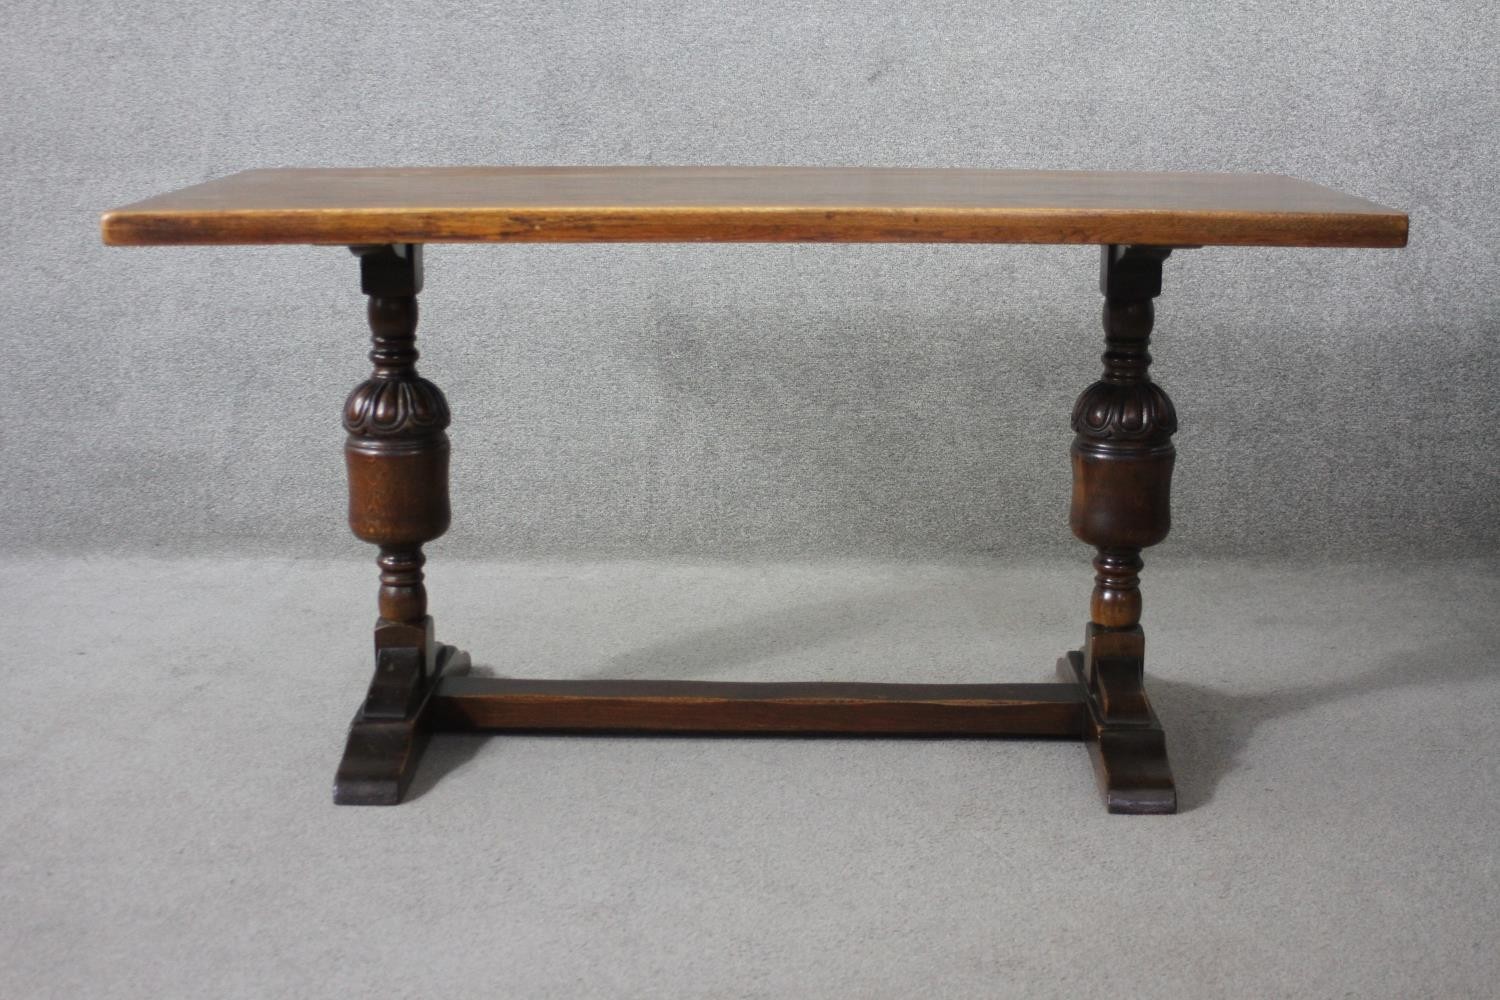 A mid century oak Jacobean style refectory dining table on carved baluster stretchered platform